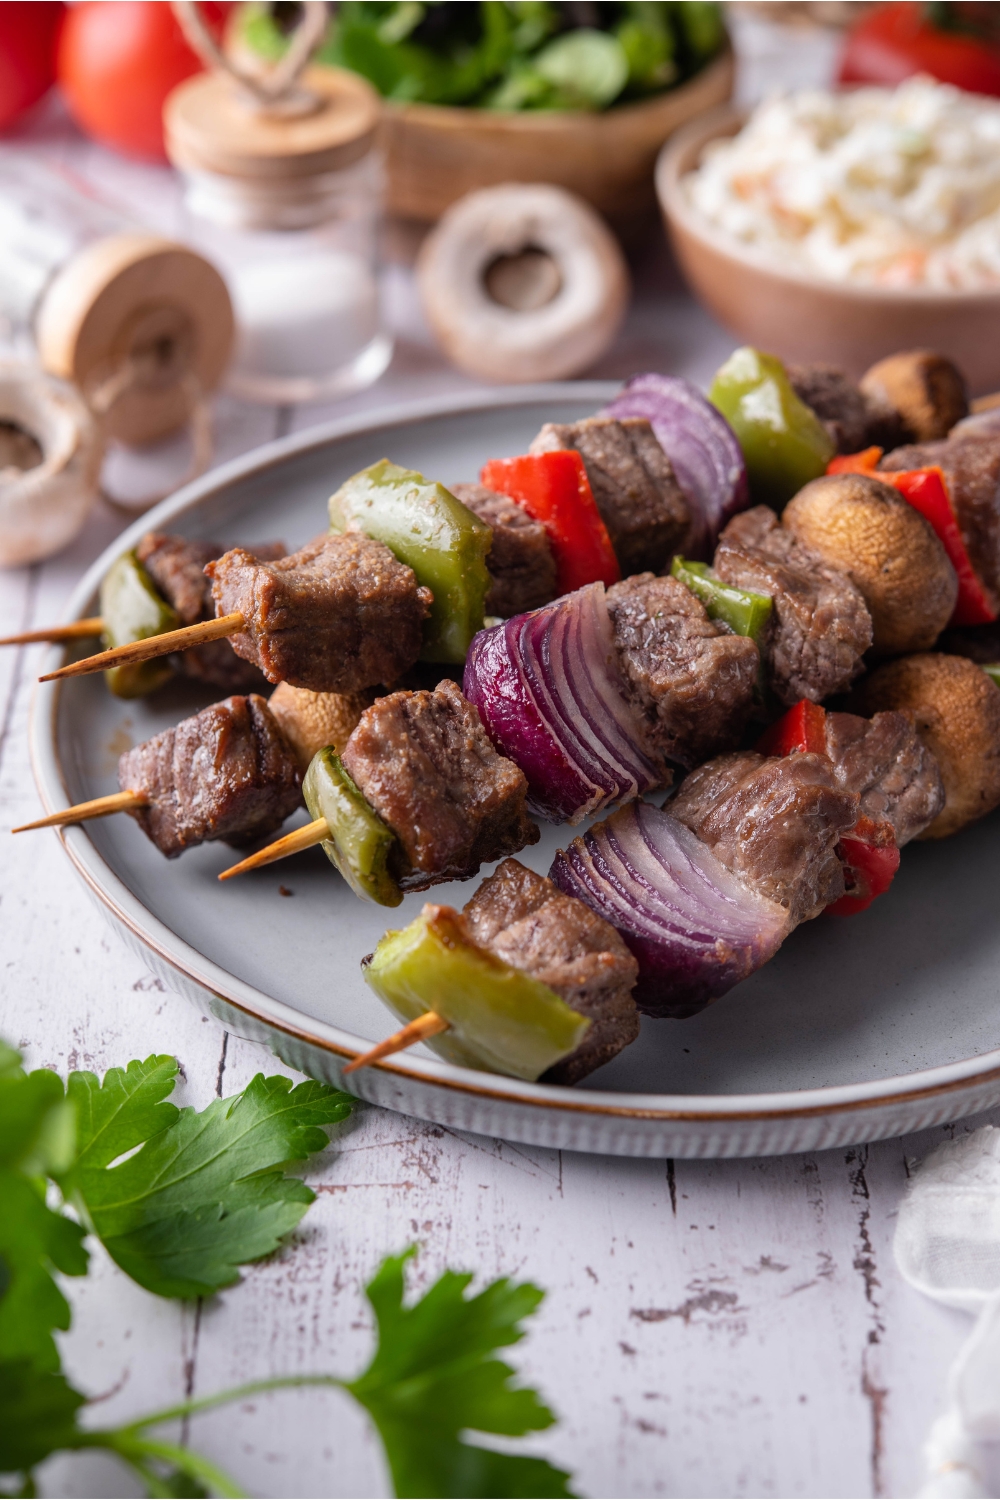 A stack of five baked steak kebabs filled with seasoned steak, bell peppers, mushrooms, and red onions. In the background are bowls of coleslaw and salad.